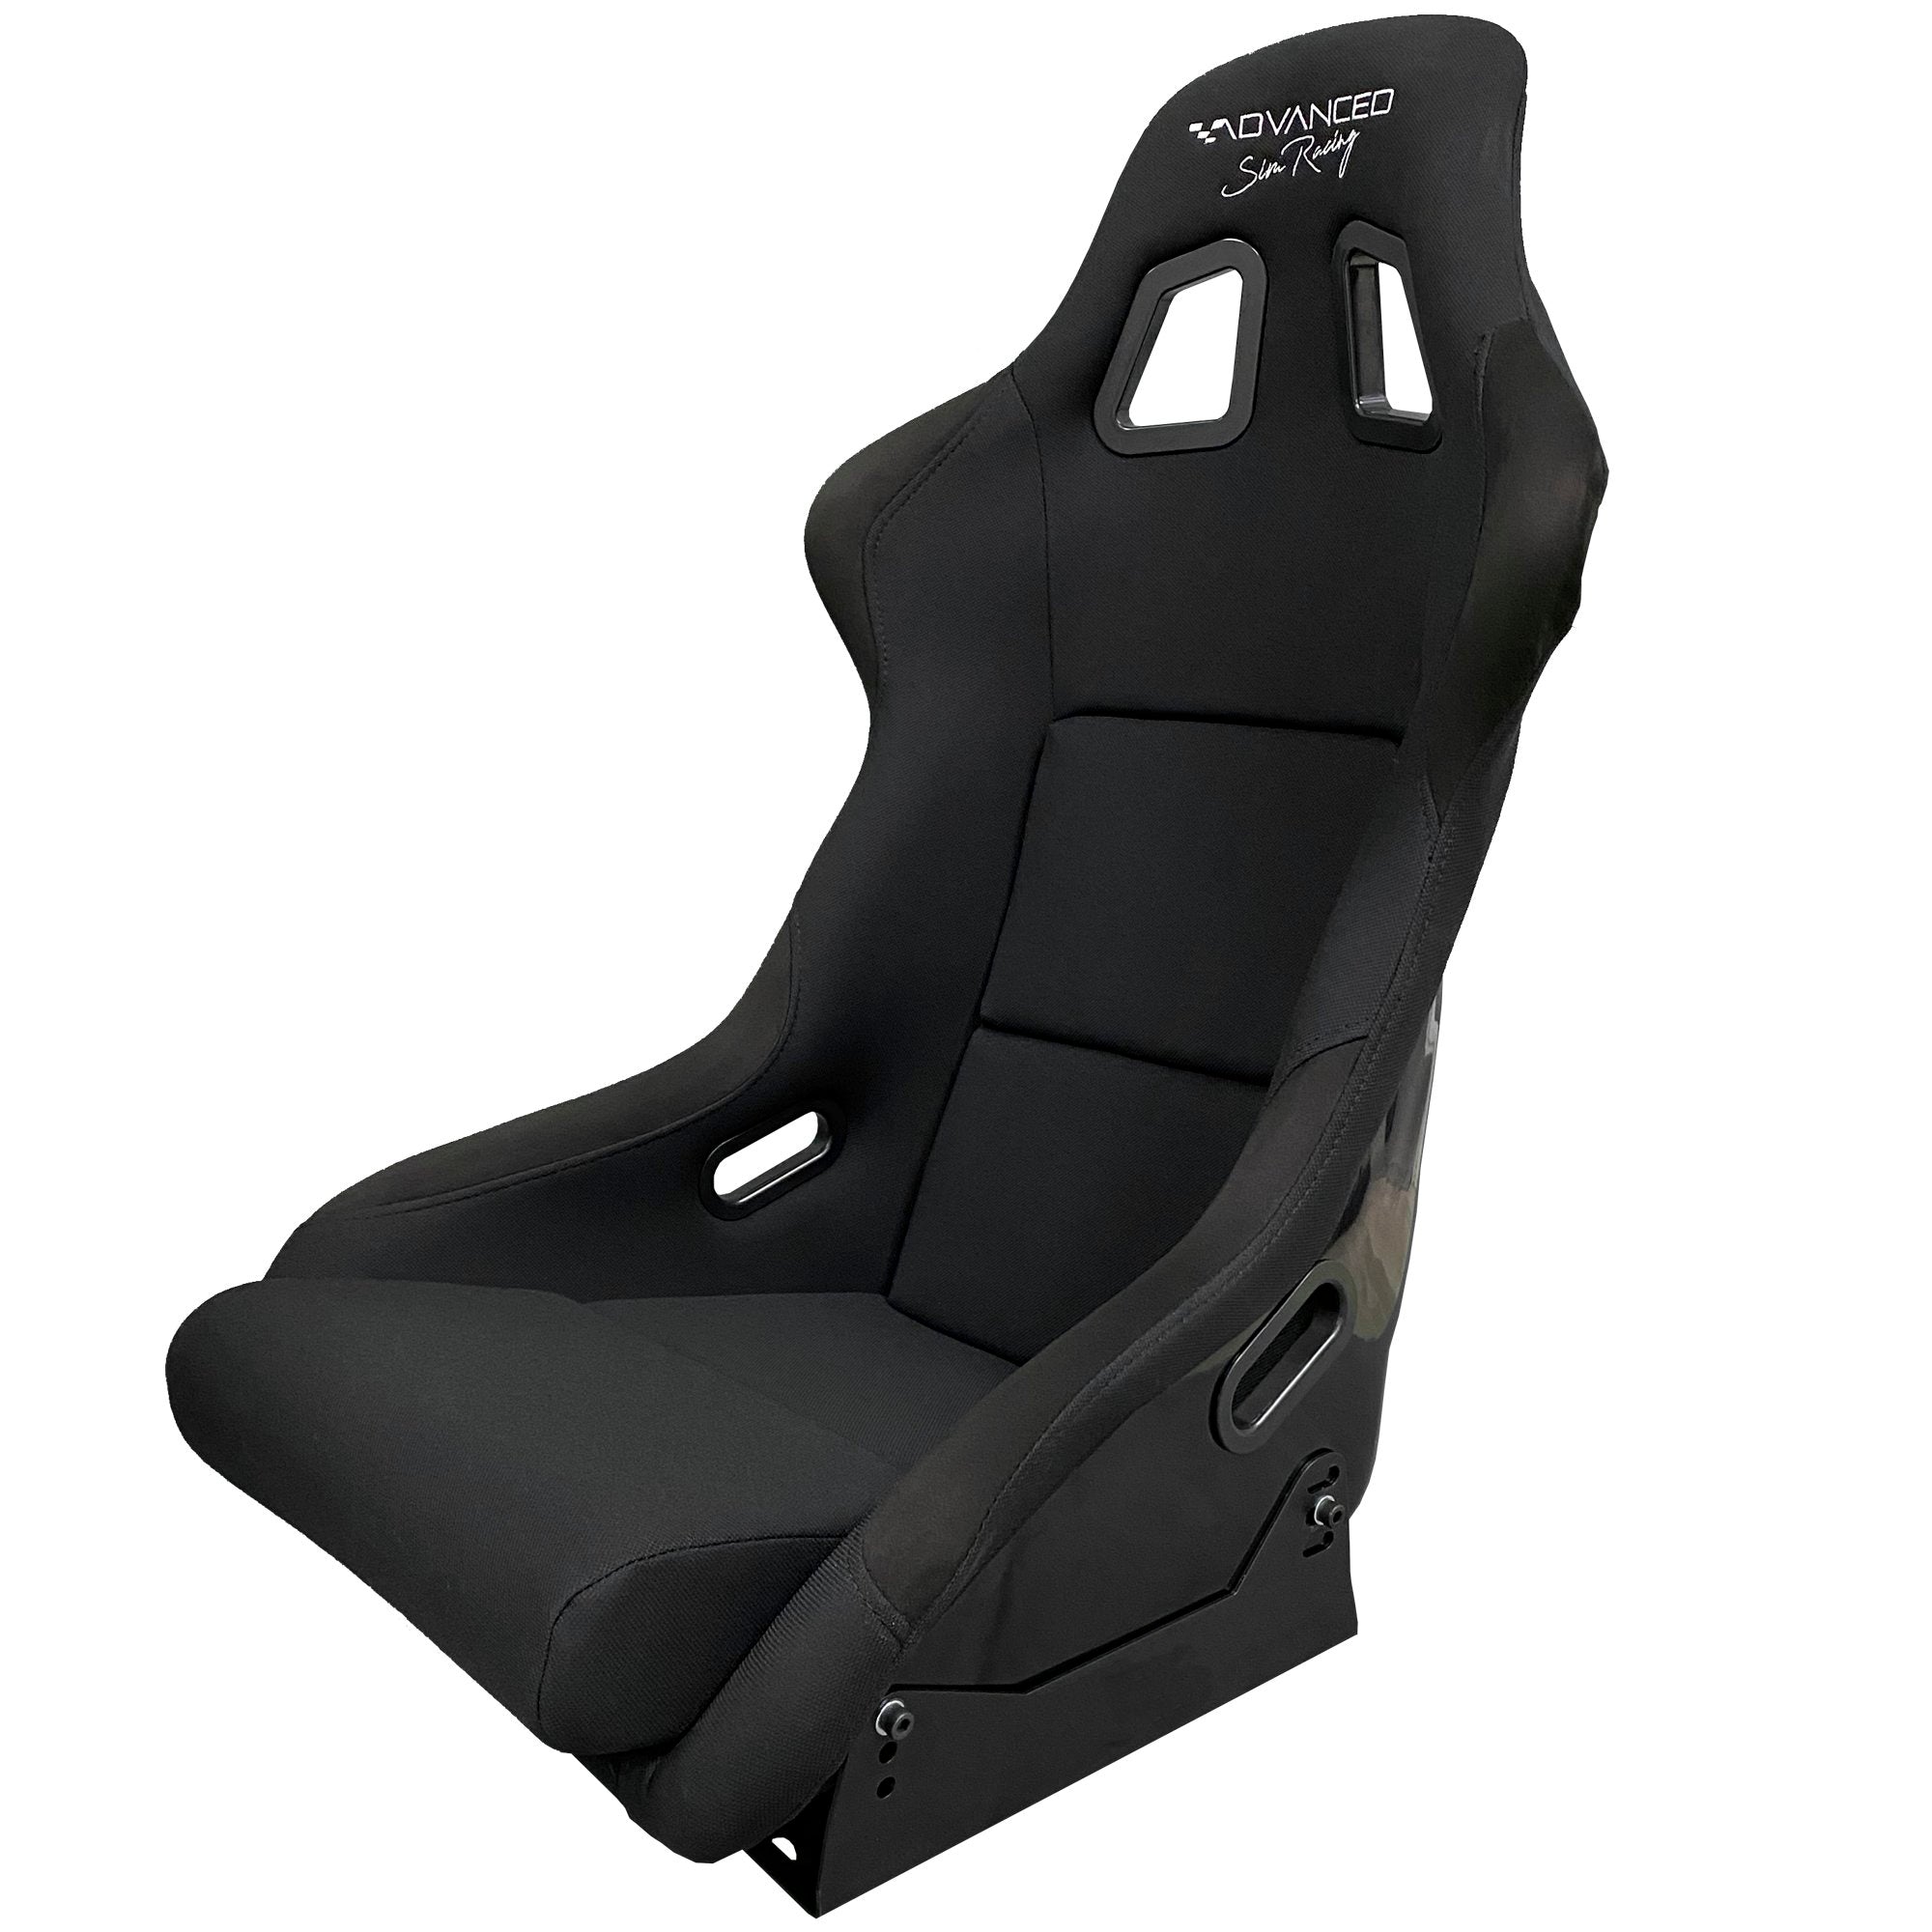 Sparco Italy R100+ Car Seat black, Shop by Team \ Motorsport Equipment \  Sparco Car parts \ Seats and frames \ Seats